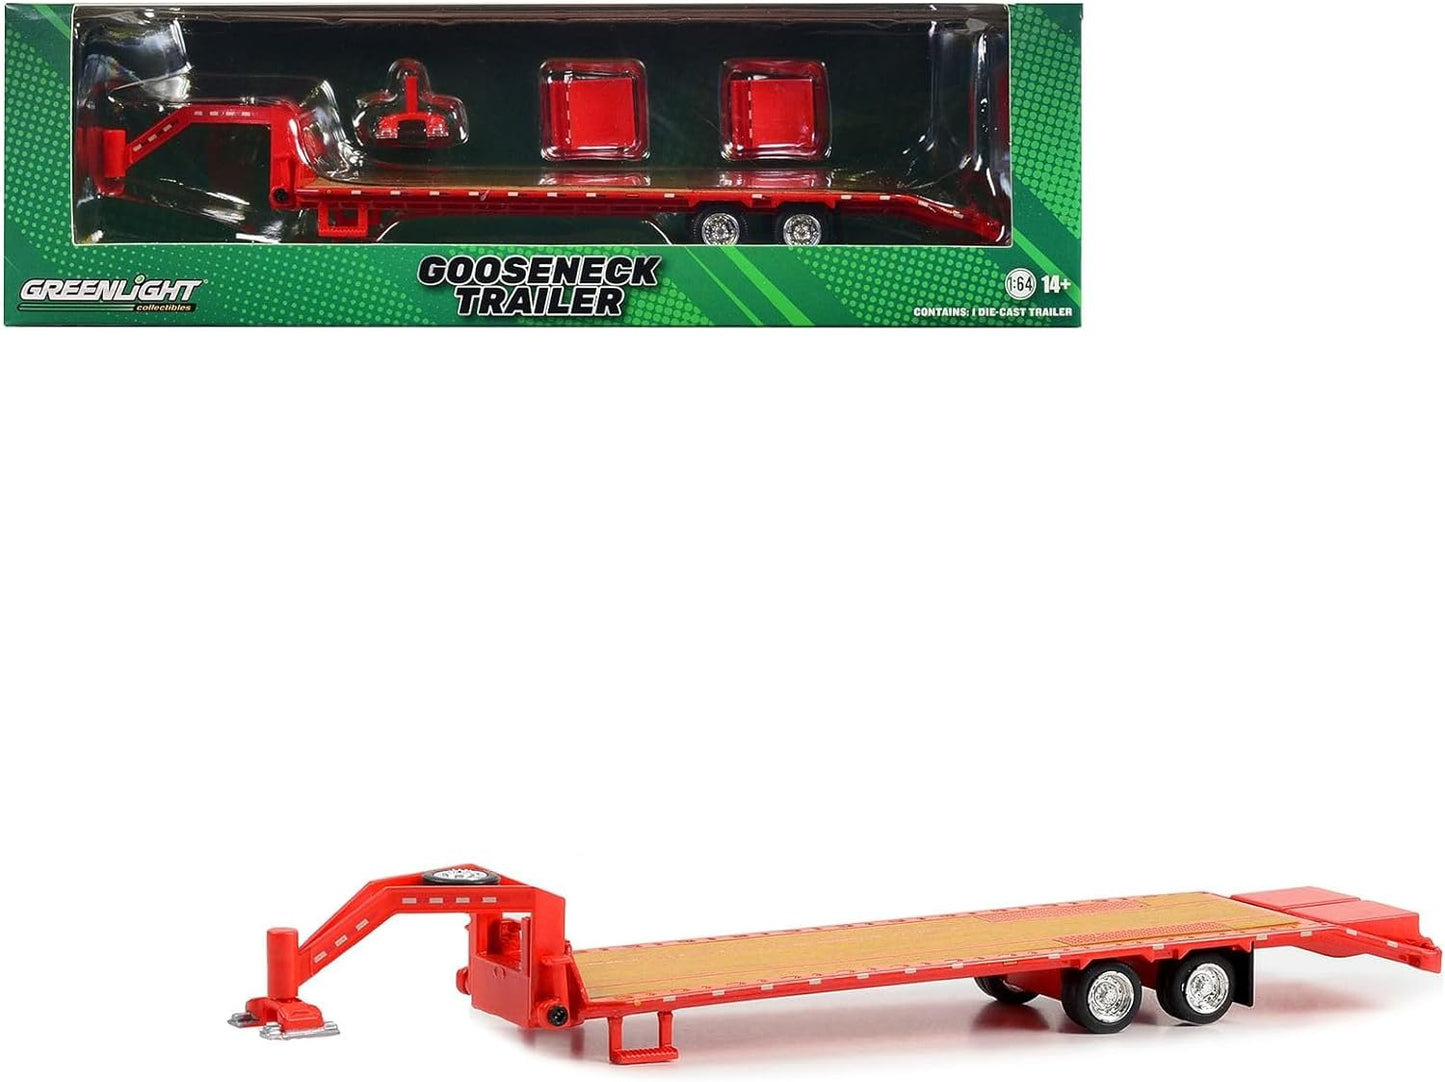 GreenLight 1:64 Gooseneck Trailer - Red with Red and White Conspicuity Stripes 30467